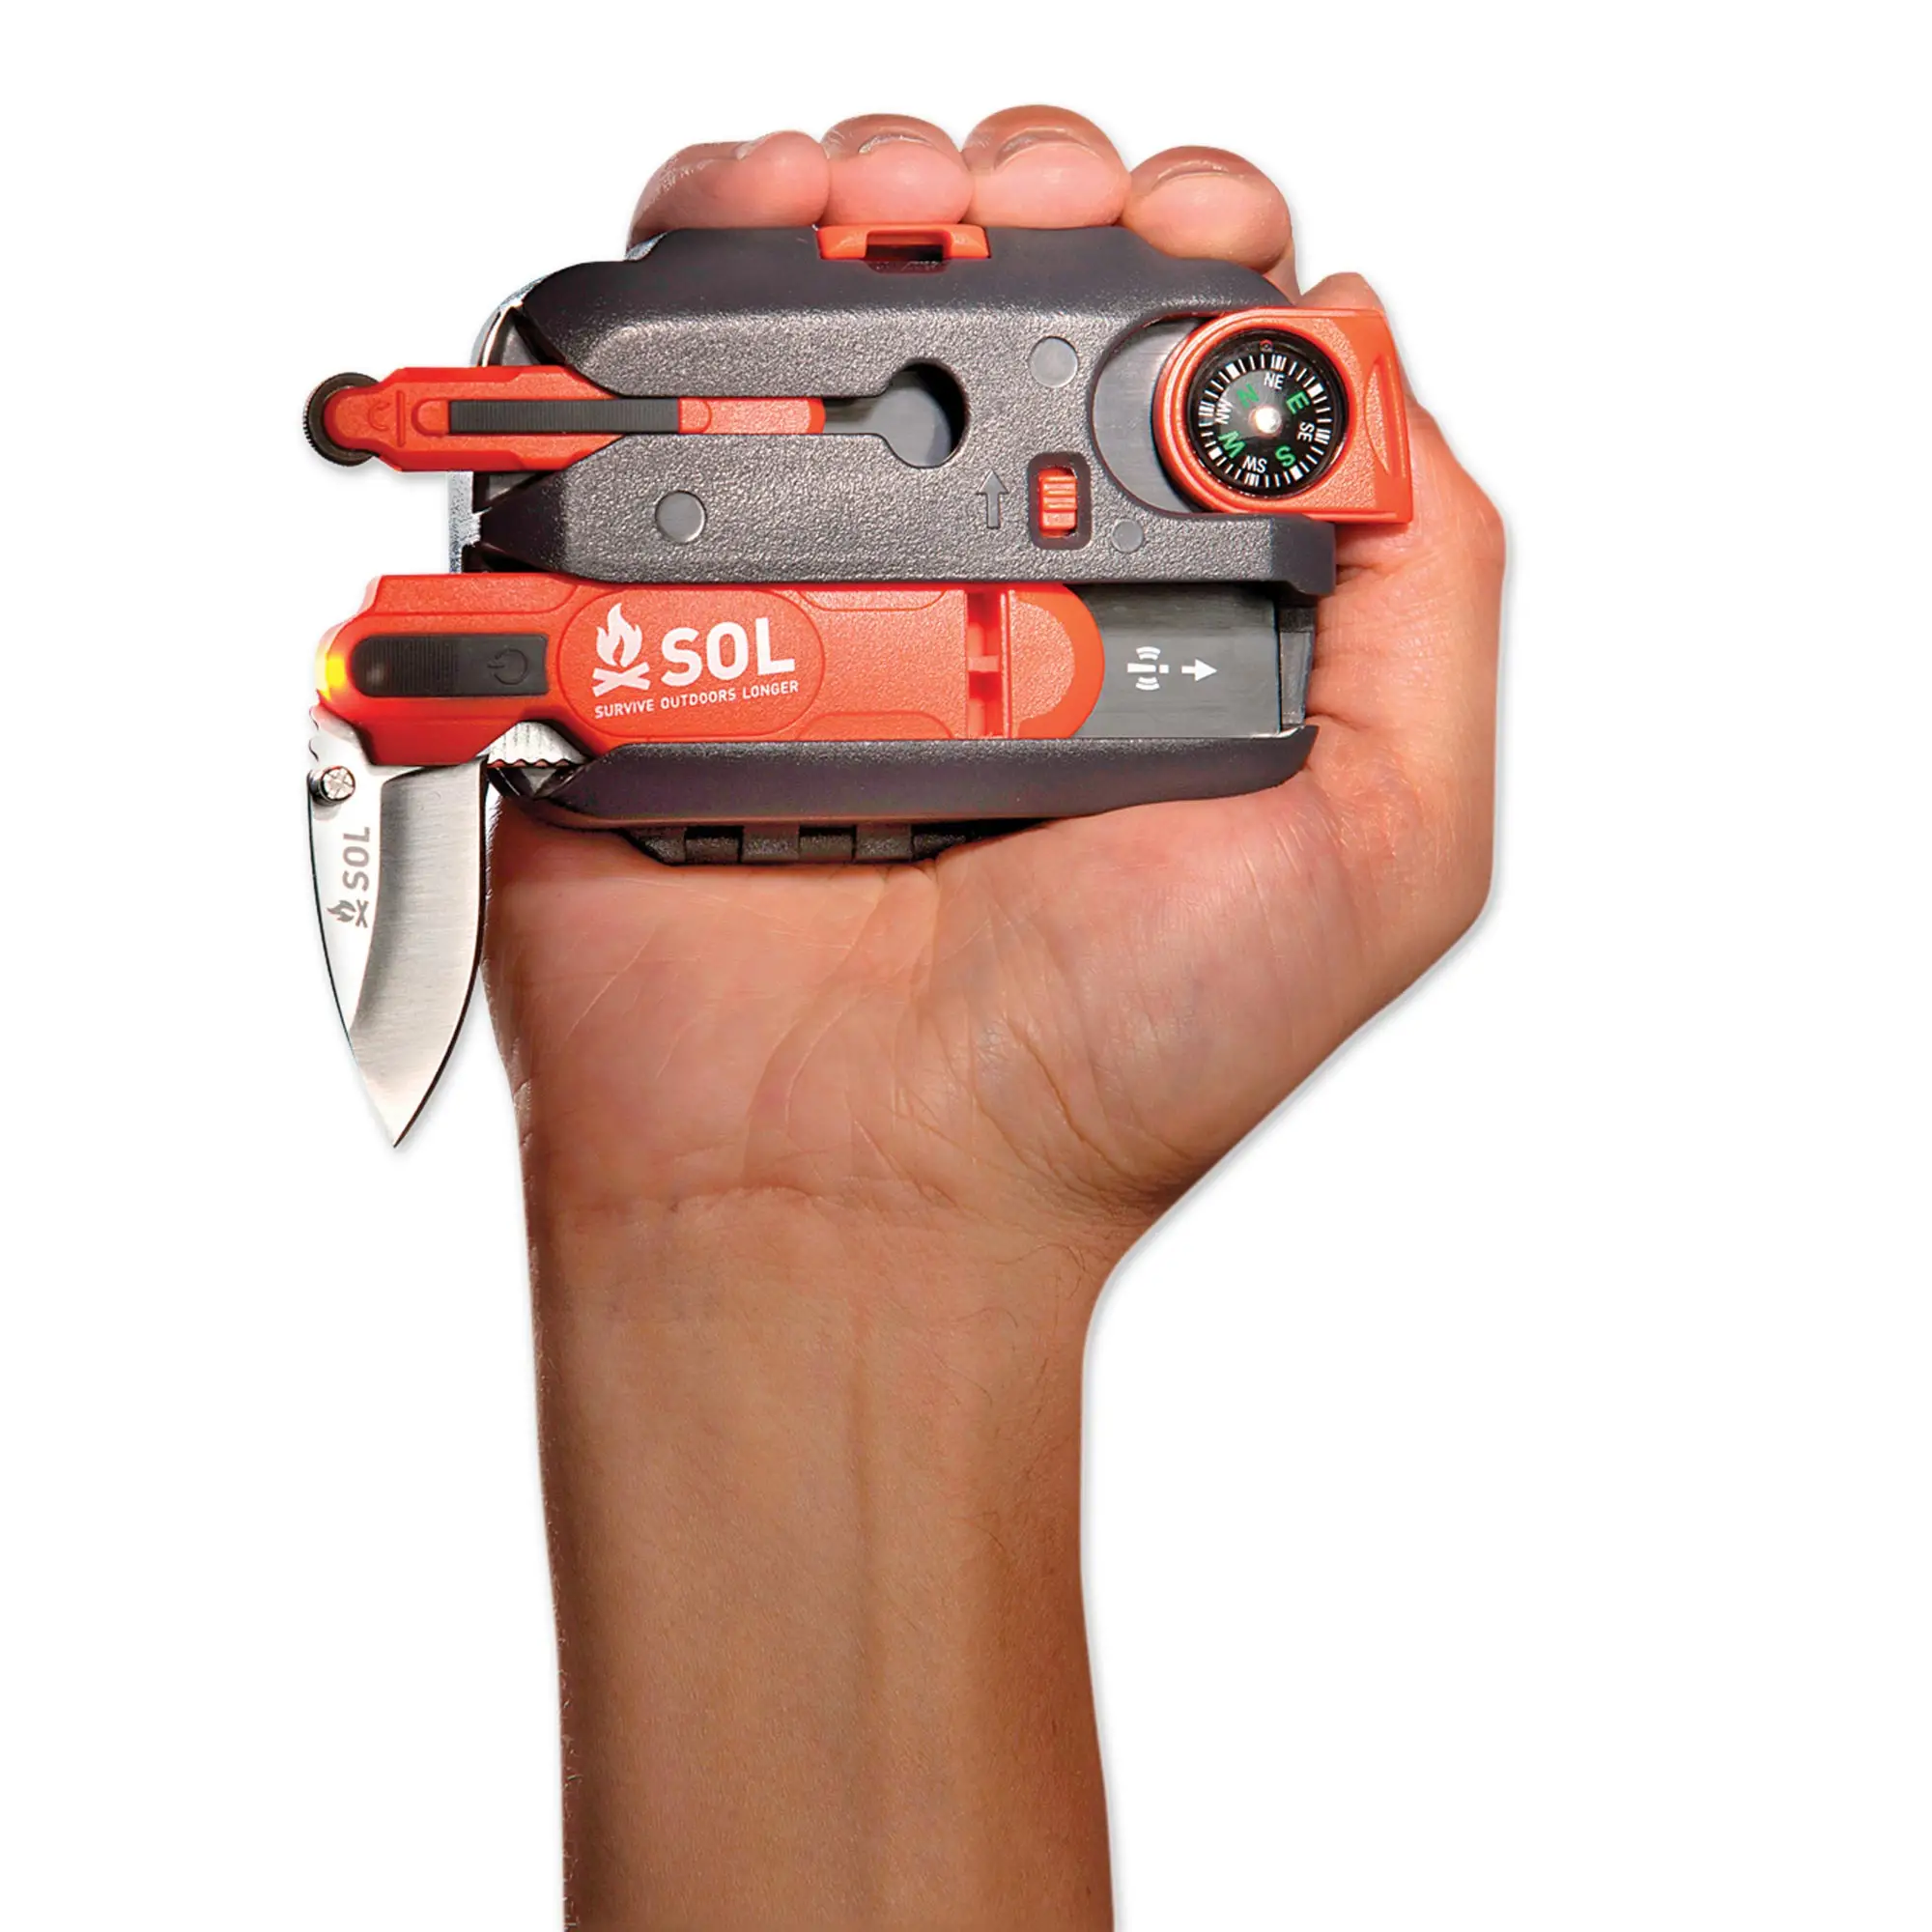 Sol Outdoor Multitool Gift Guide